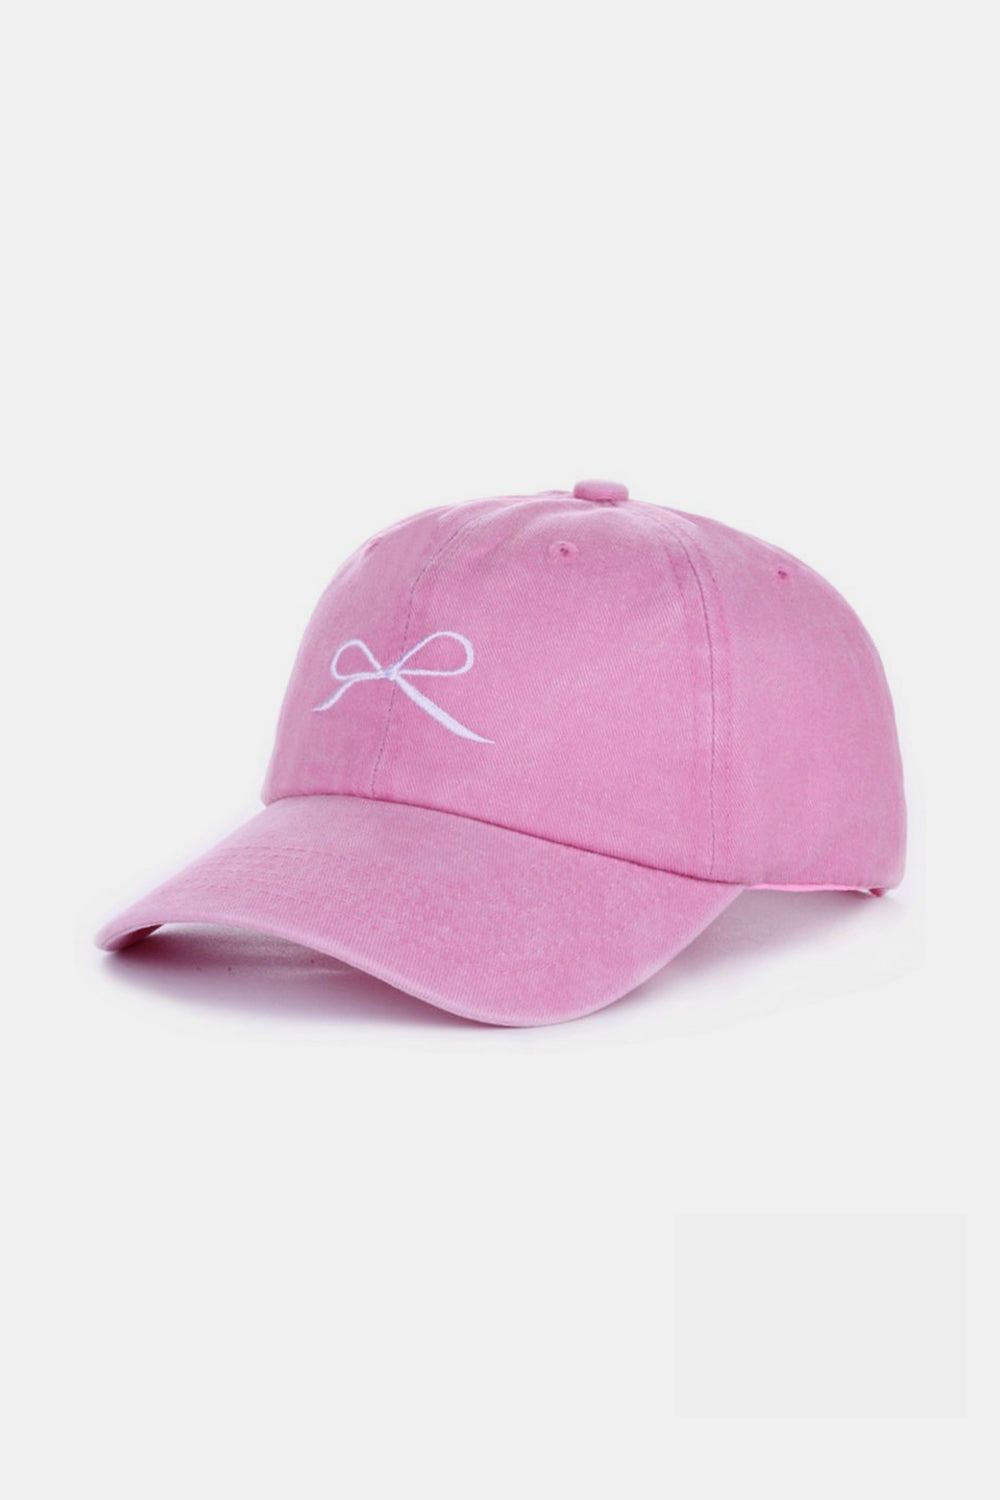 Bow Embroidered Washed Cotton Caps - Multiple Colors!